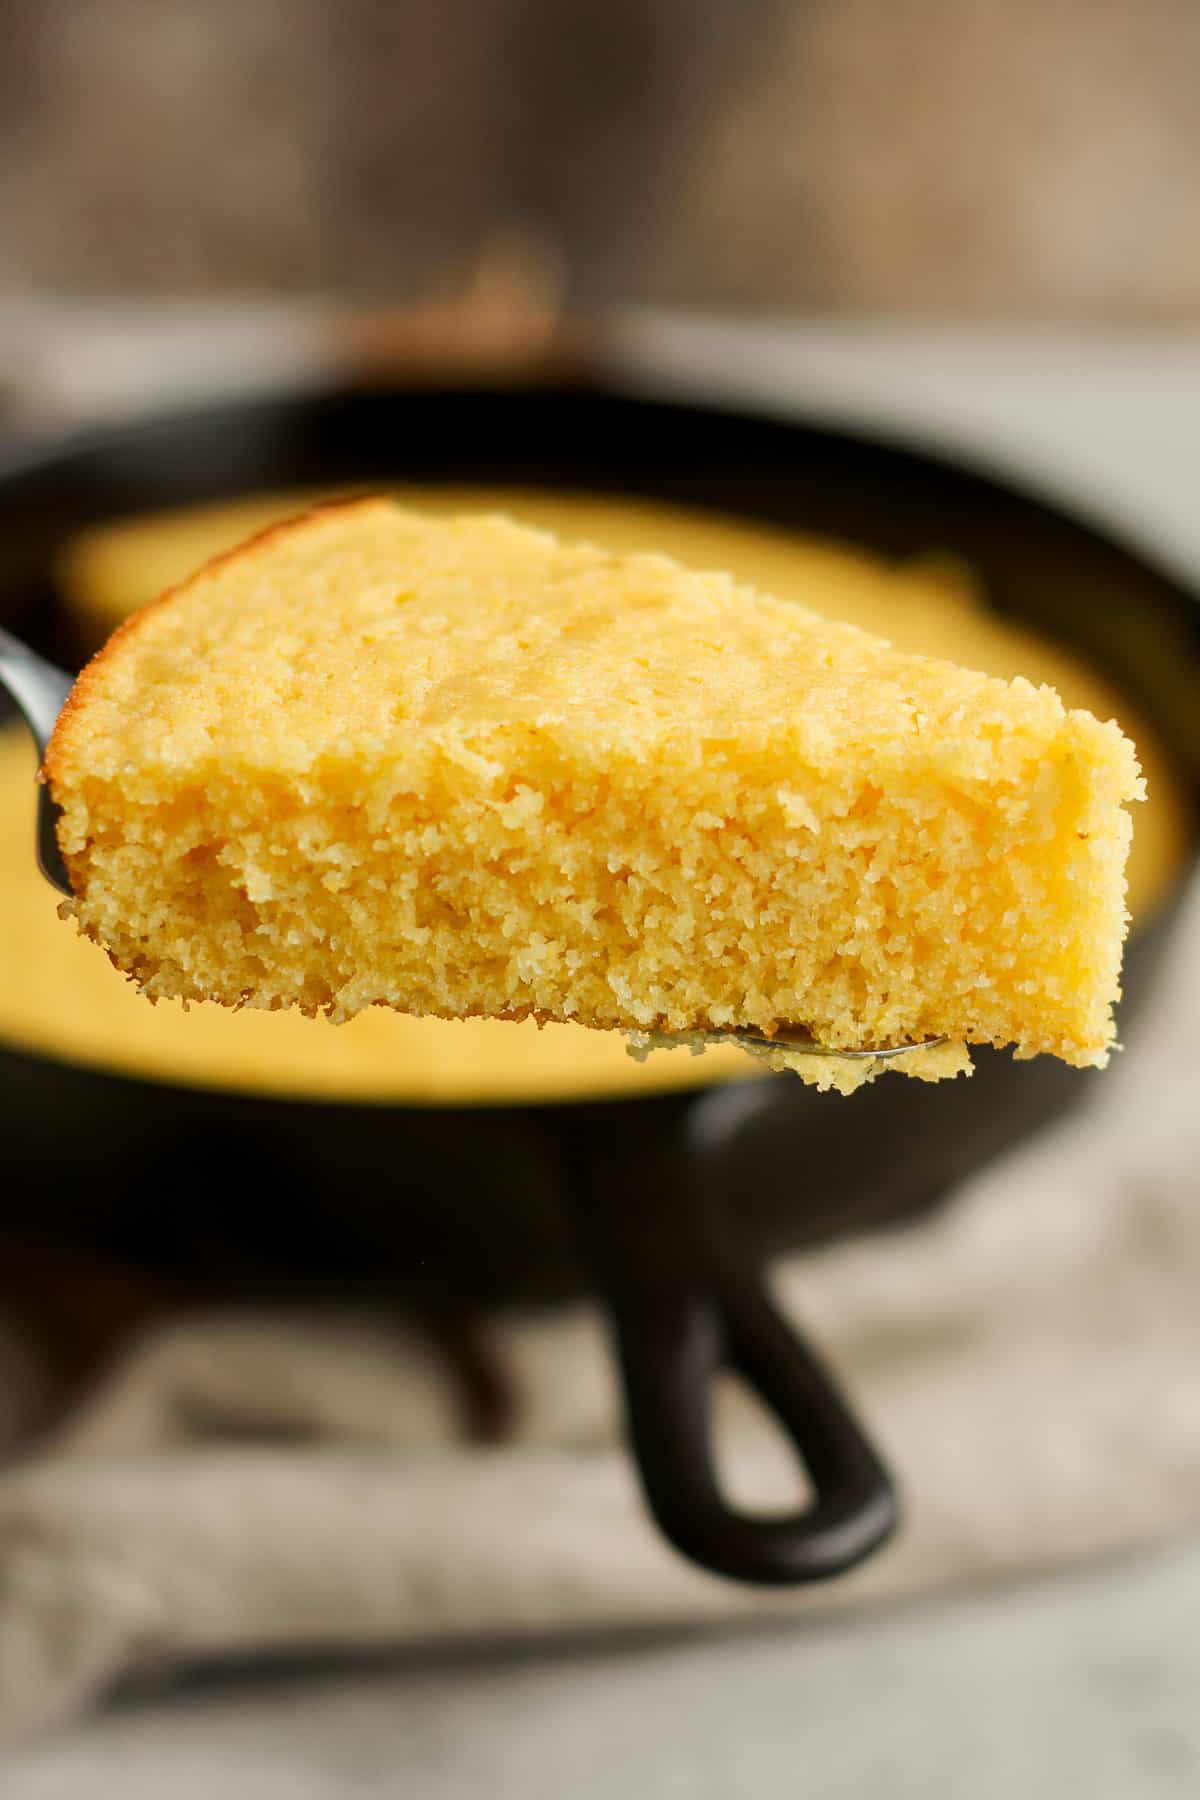 Side view of a slice of just baked cornbread.